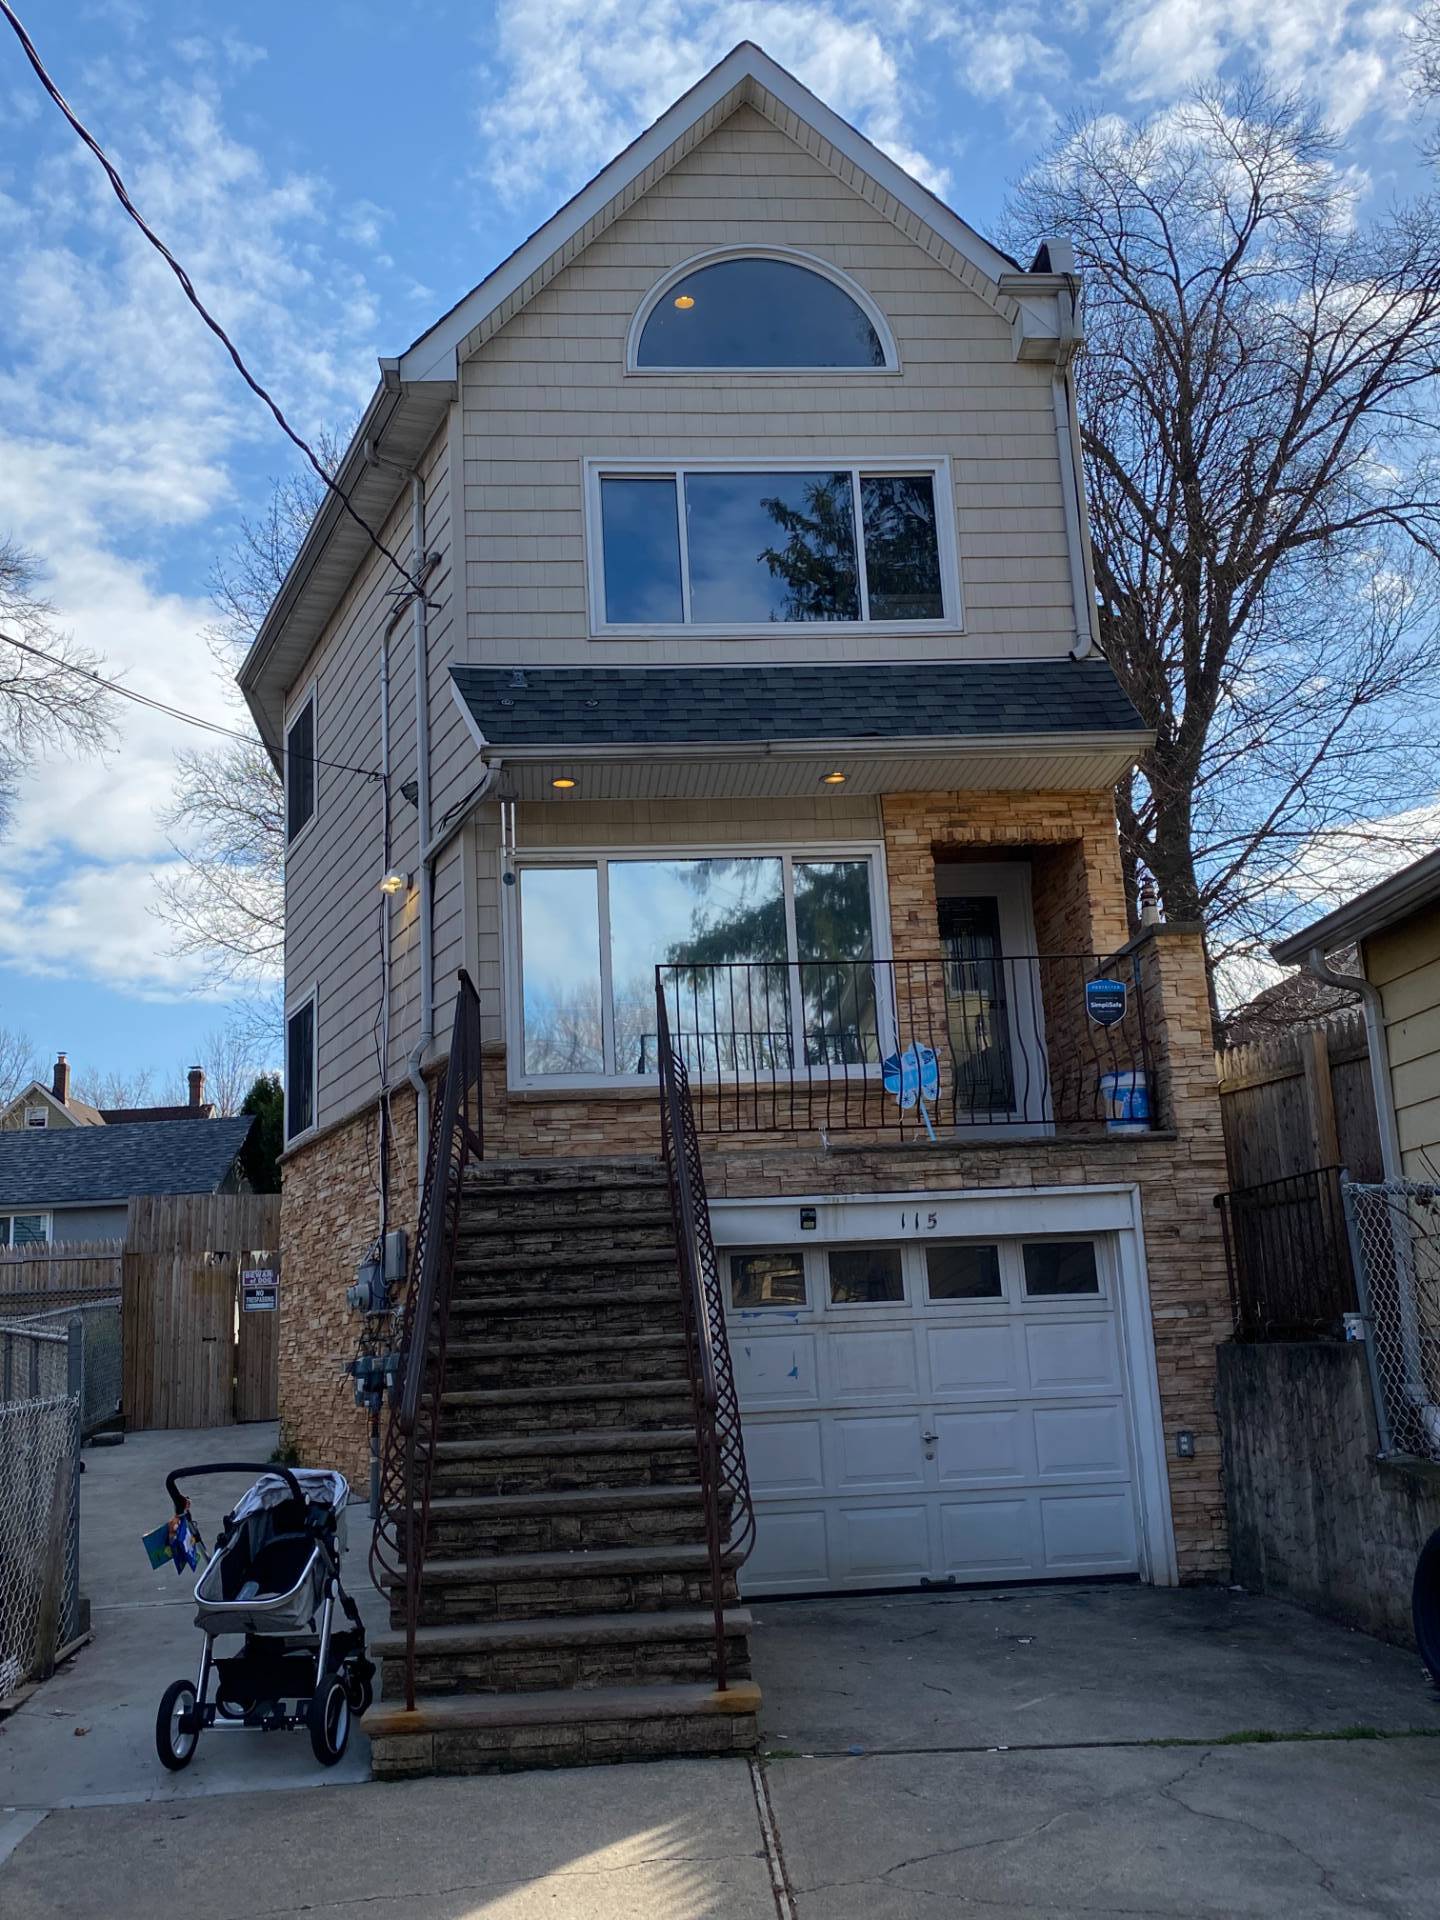 115 Roe Street, Staten Island, NY 10310 (Sold NYStateMLS Listing #11064009)